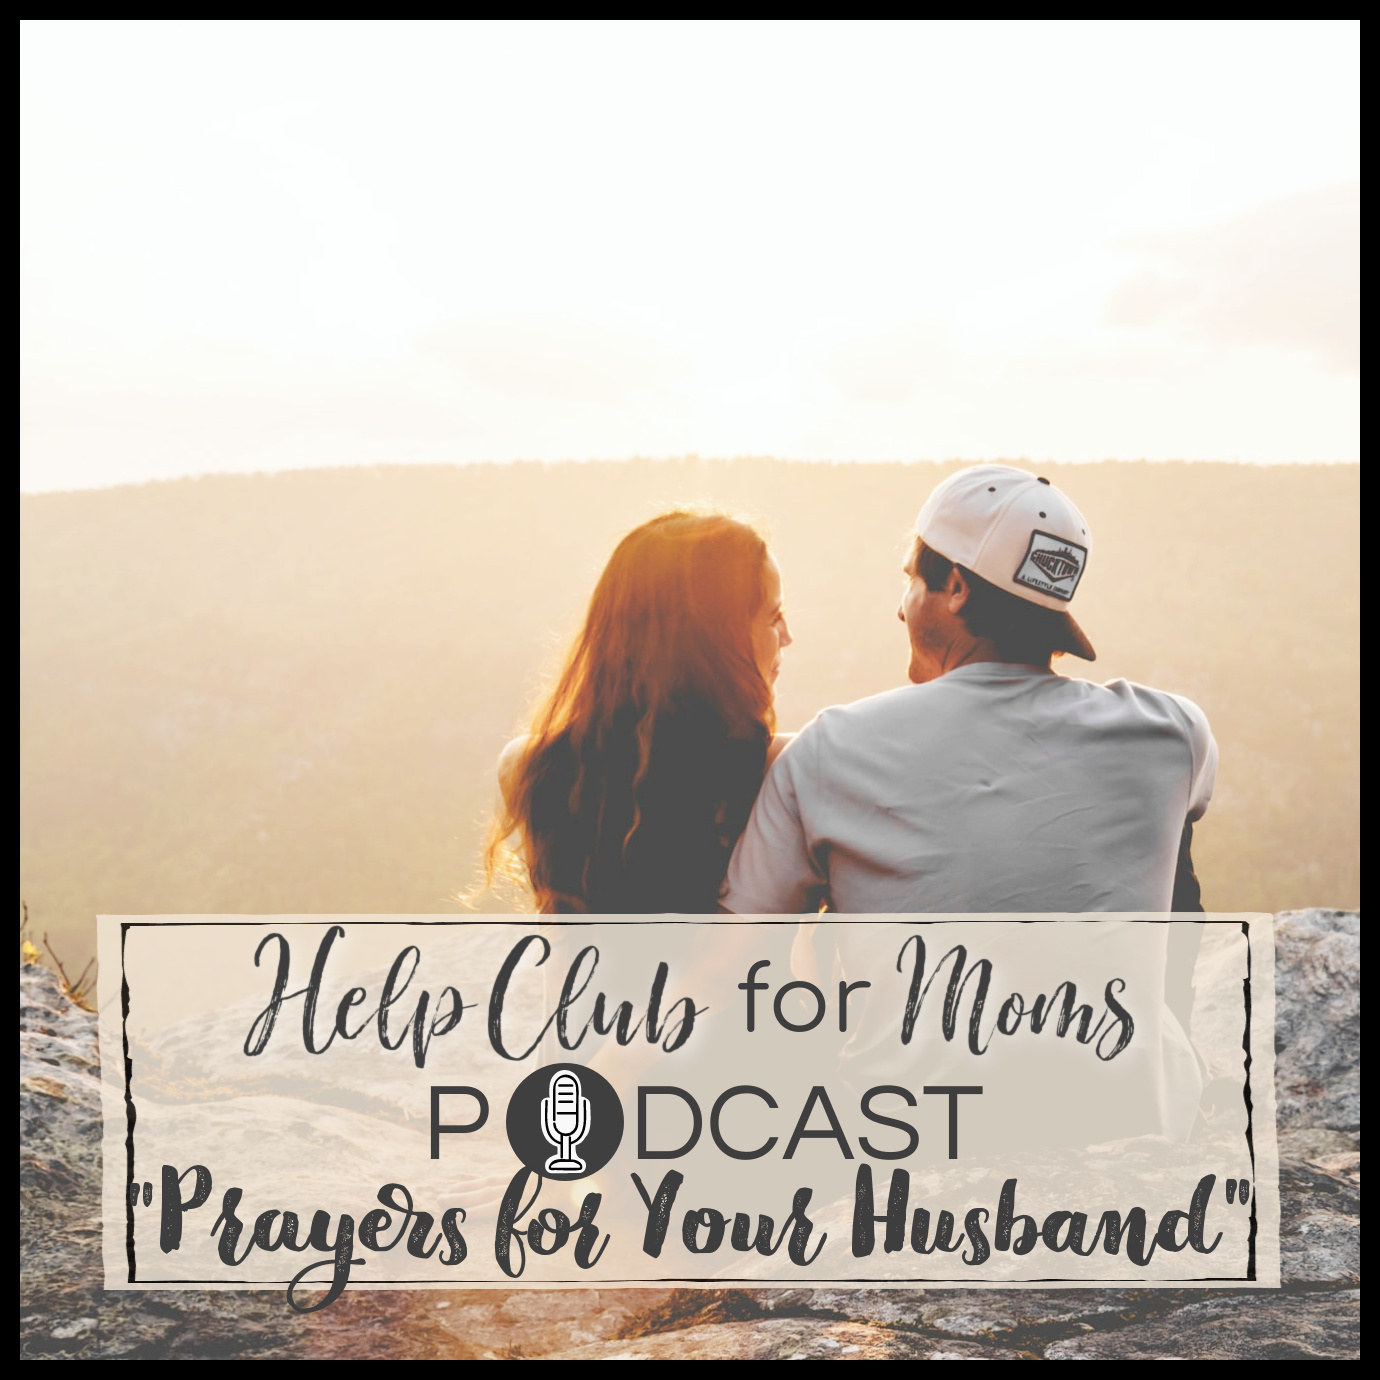 Tuesday Prayers for Your Husband- Podcast